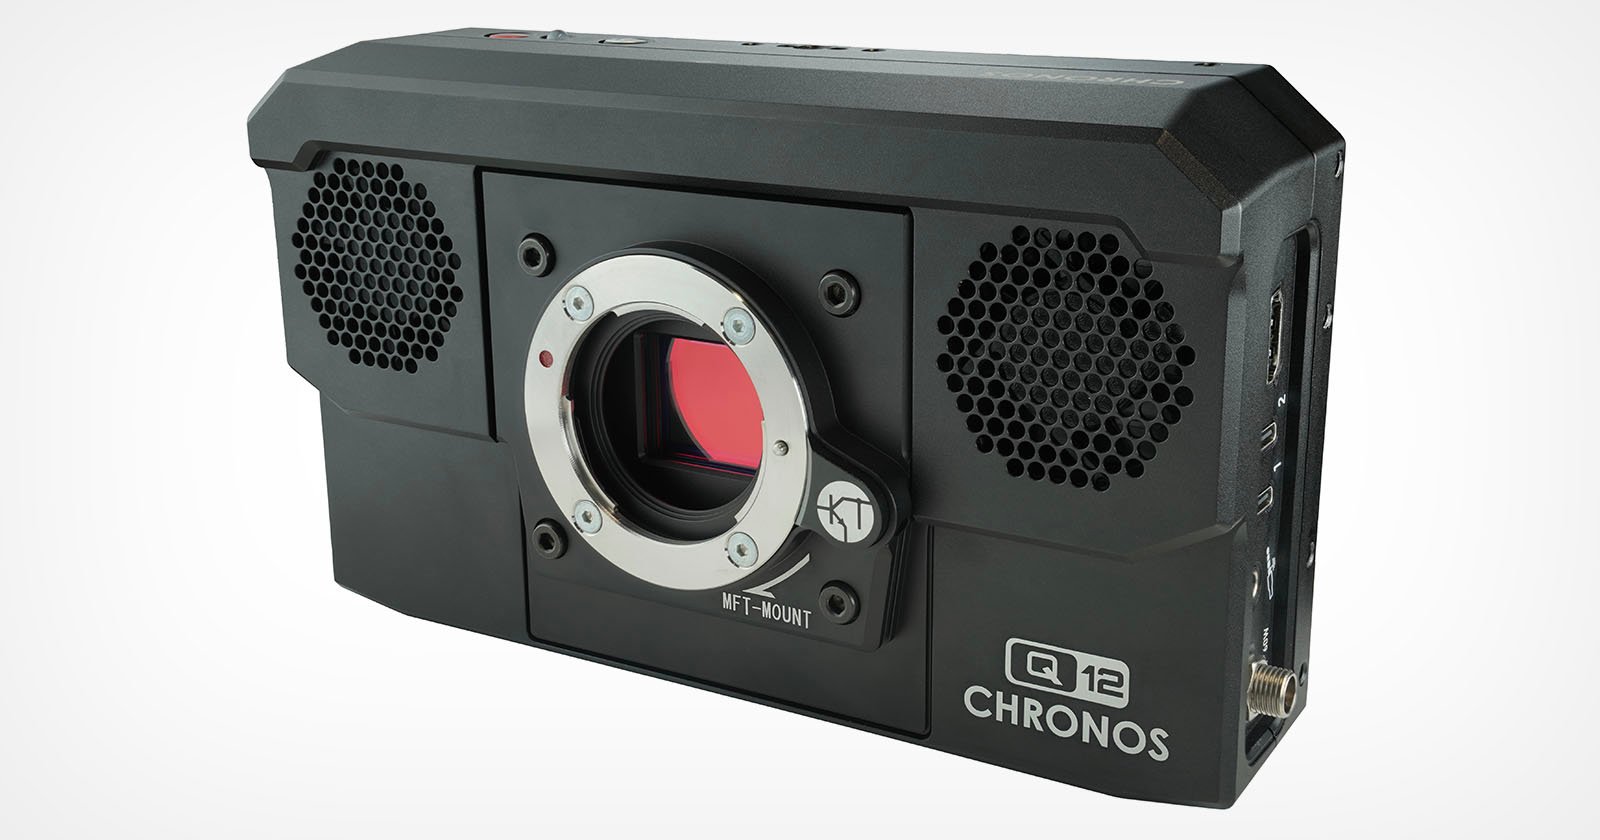 The New Affordable Chronos 4K12 and Q12 Shoot at Nearly 30,000 FPS